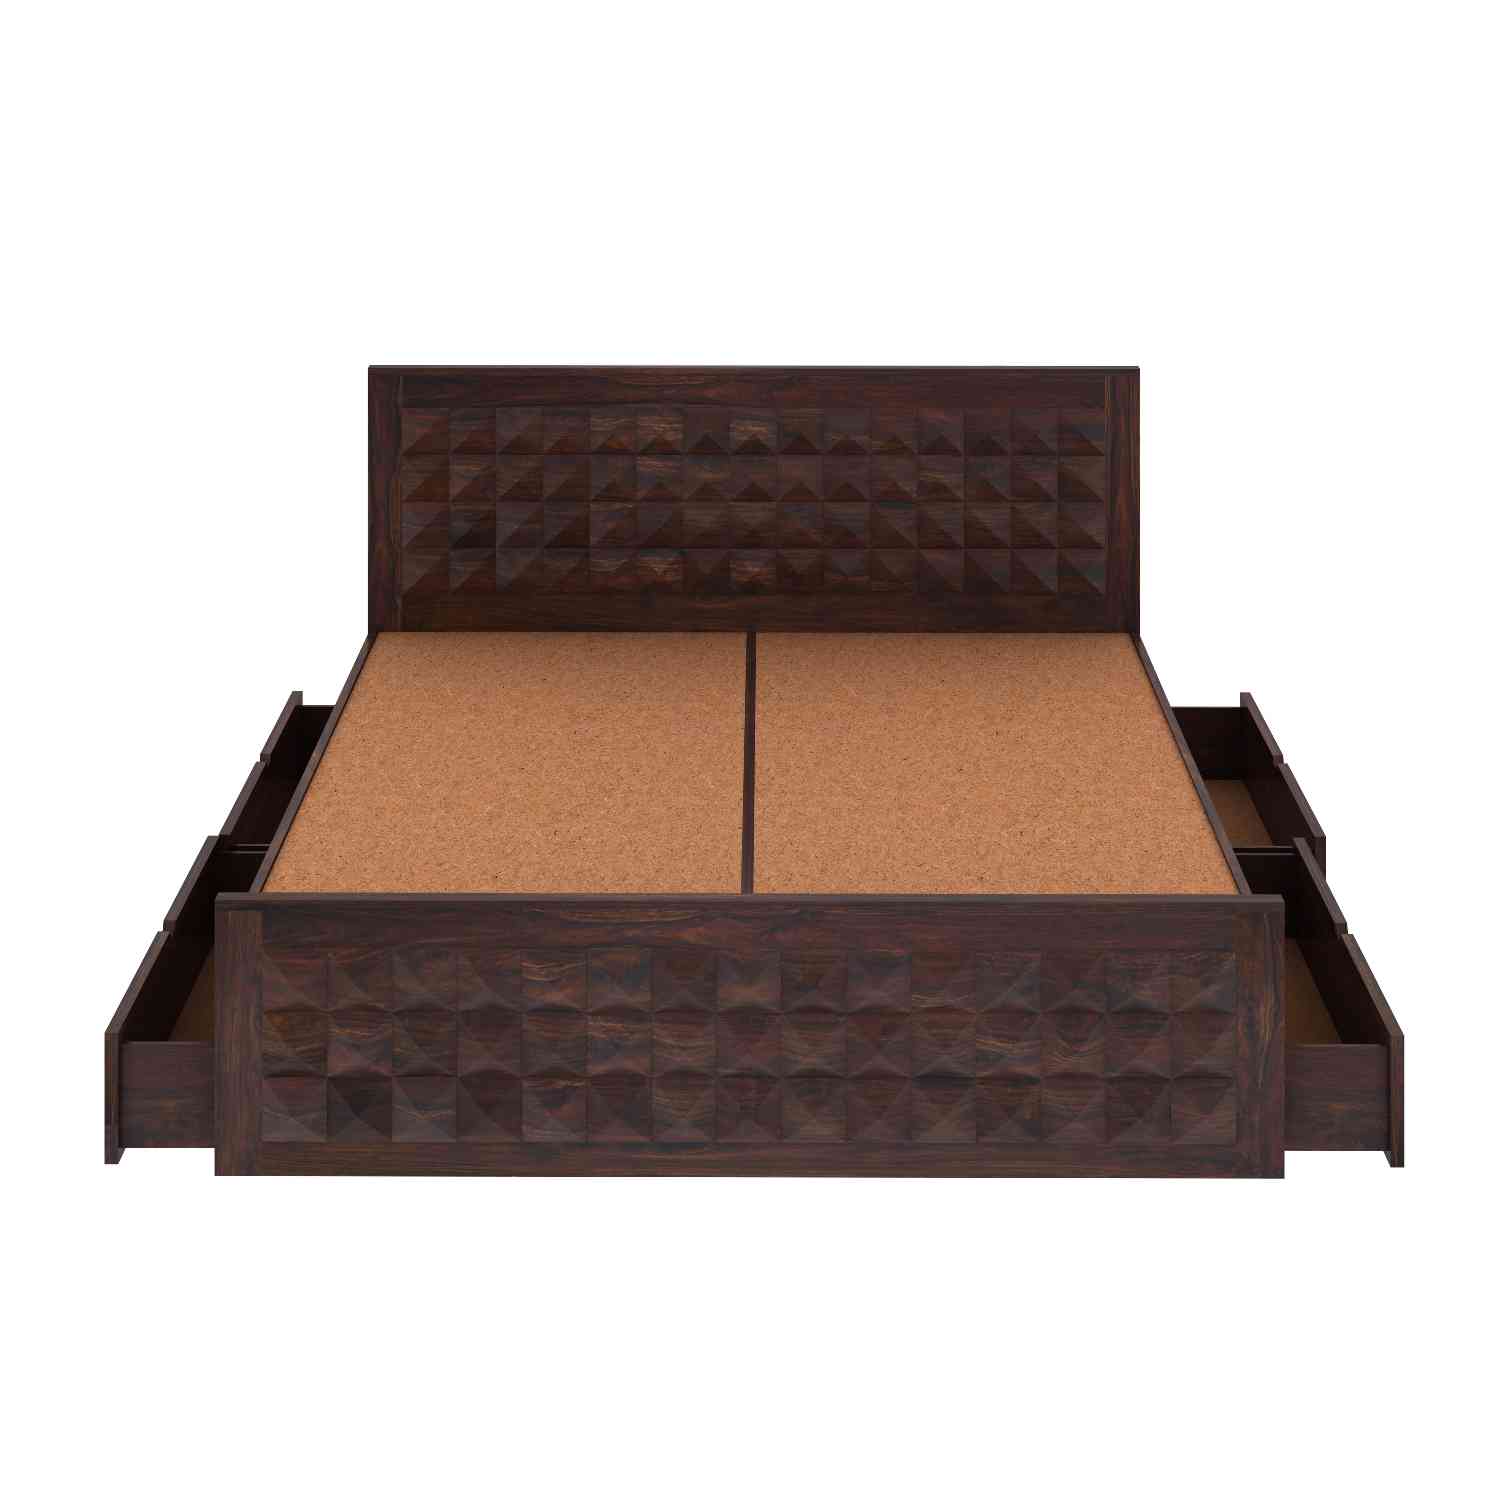 Sofia Solid Sheesham Wood Bed With Four Drawers (King Size, Walnut Finish)